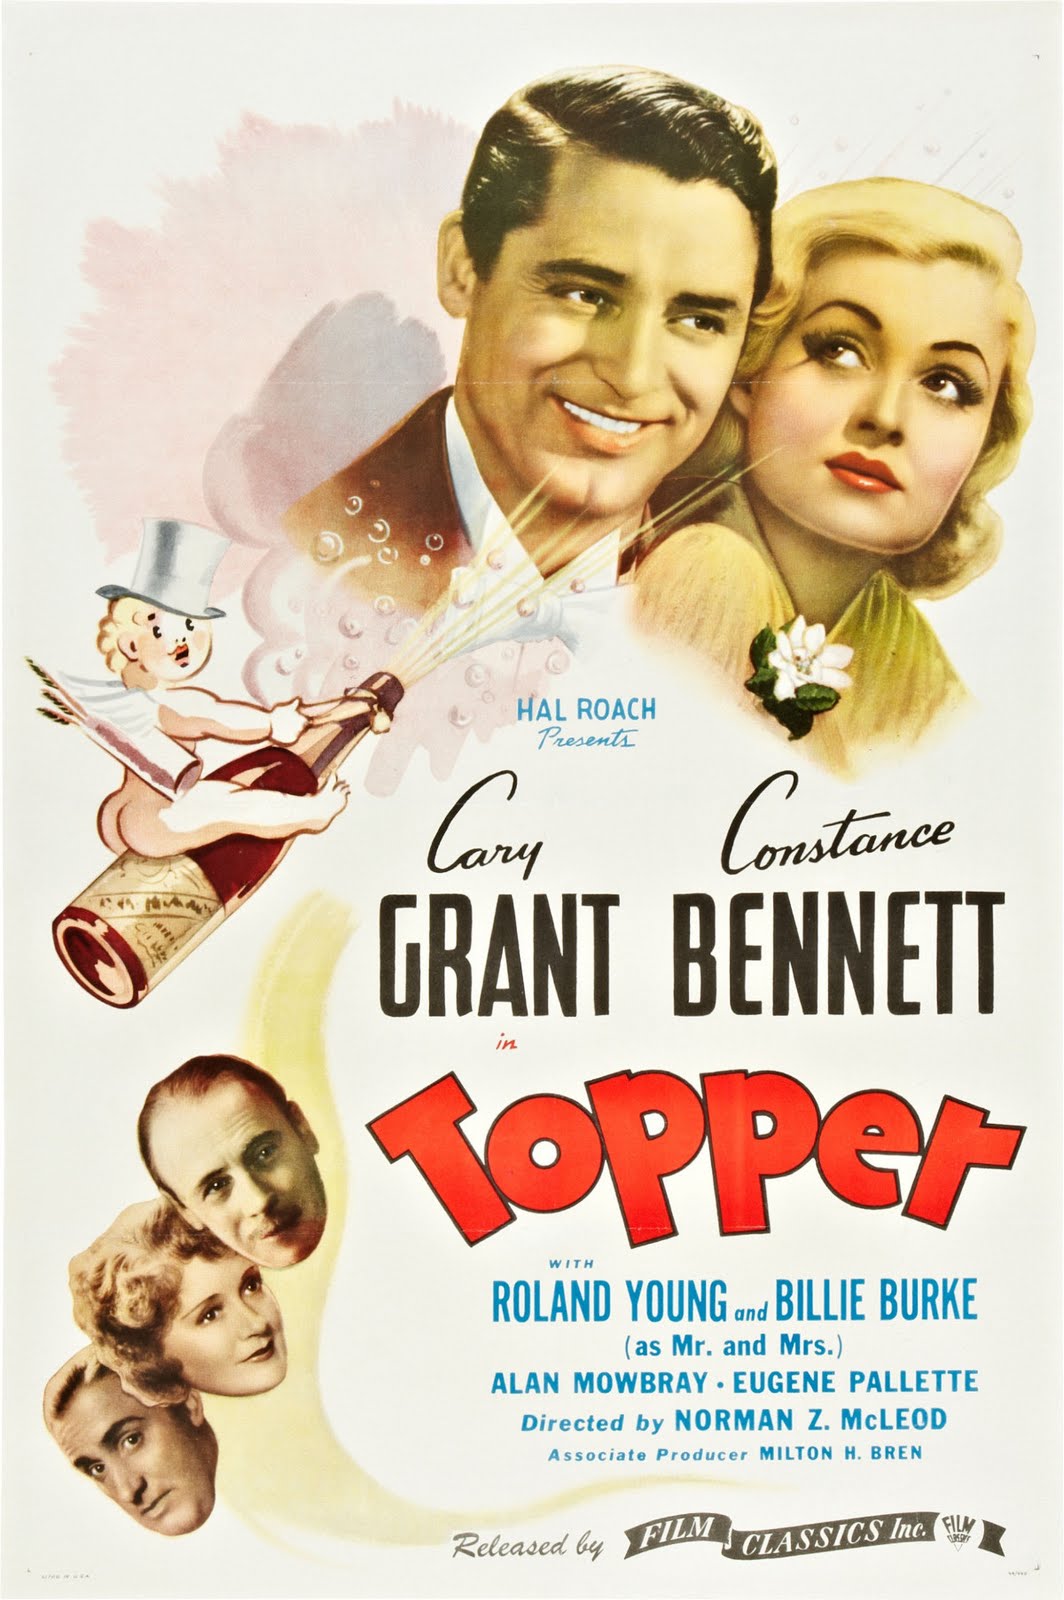 Topper is a 1937 American supernatural comedy film directed by Norman Z. McLeod, starring Constance Bennett and Cary Grant and featuring Roland Young.